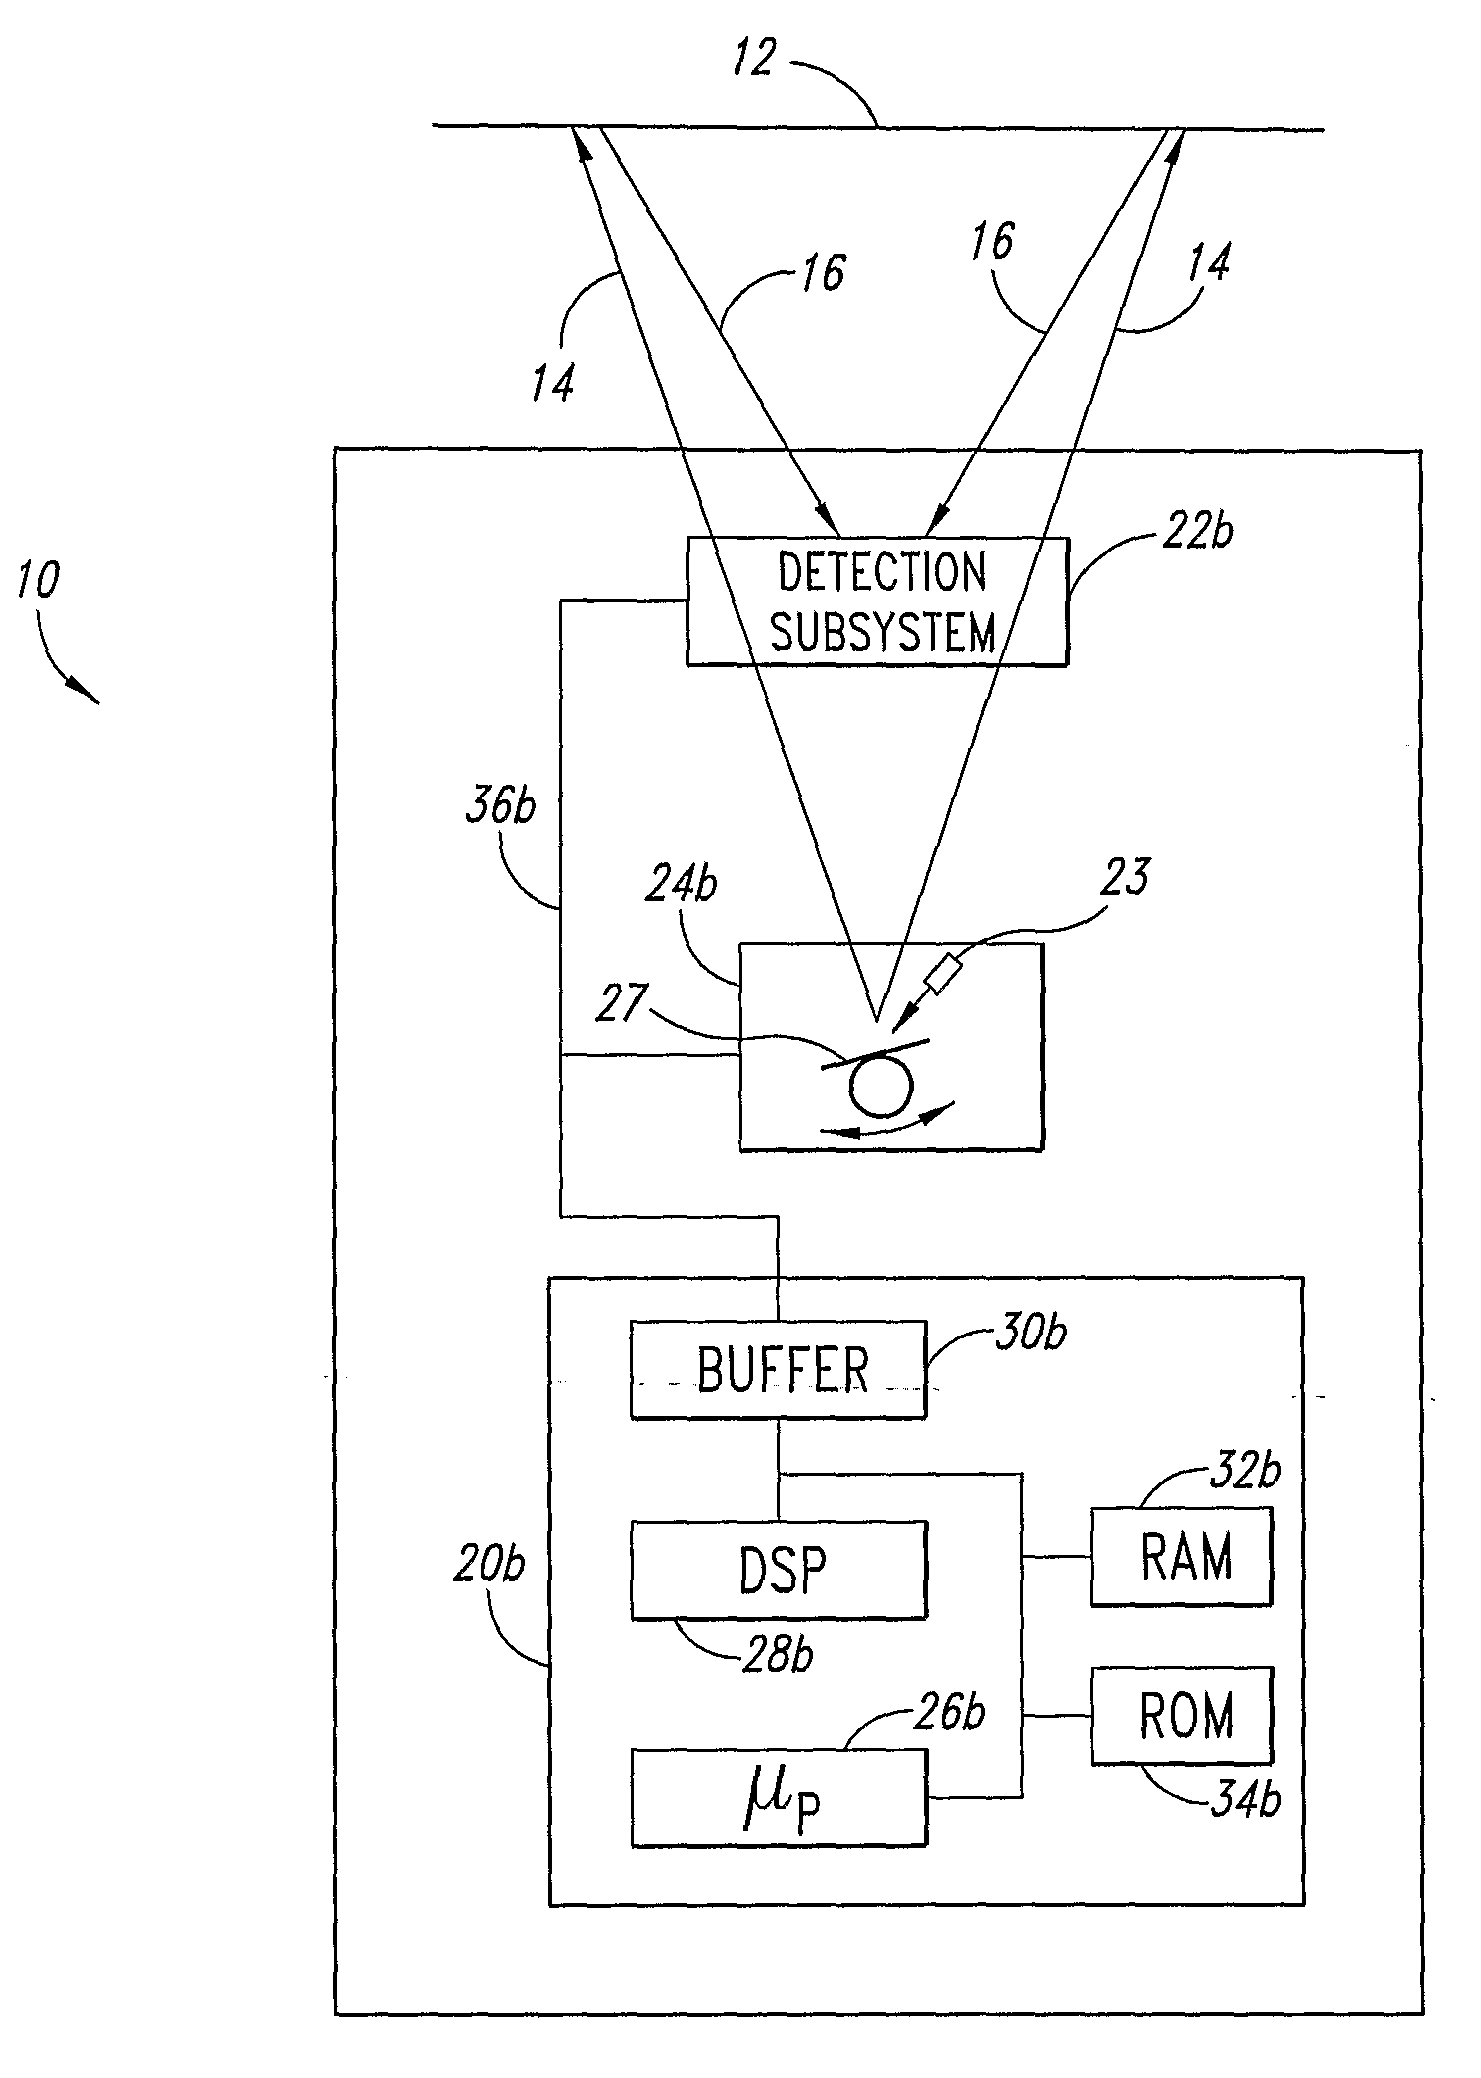 Machine-readable symbol reader and method employing an ultracompact light concentrator with adaptive field of view